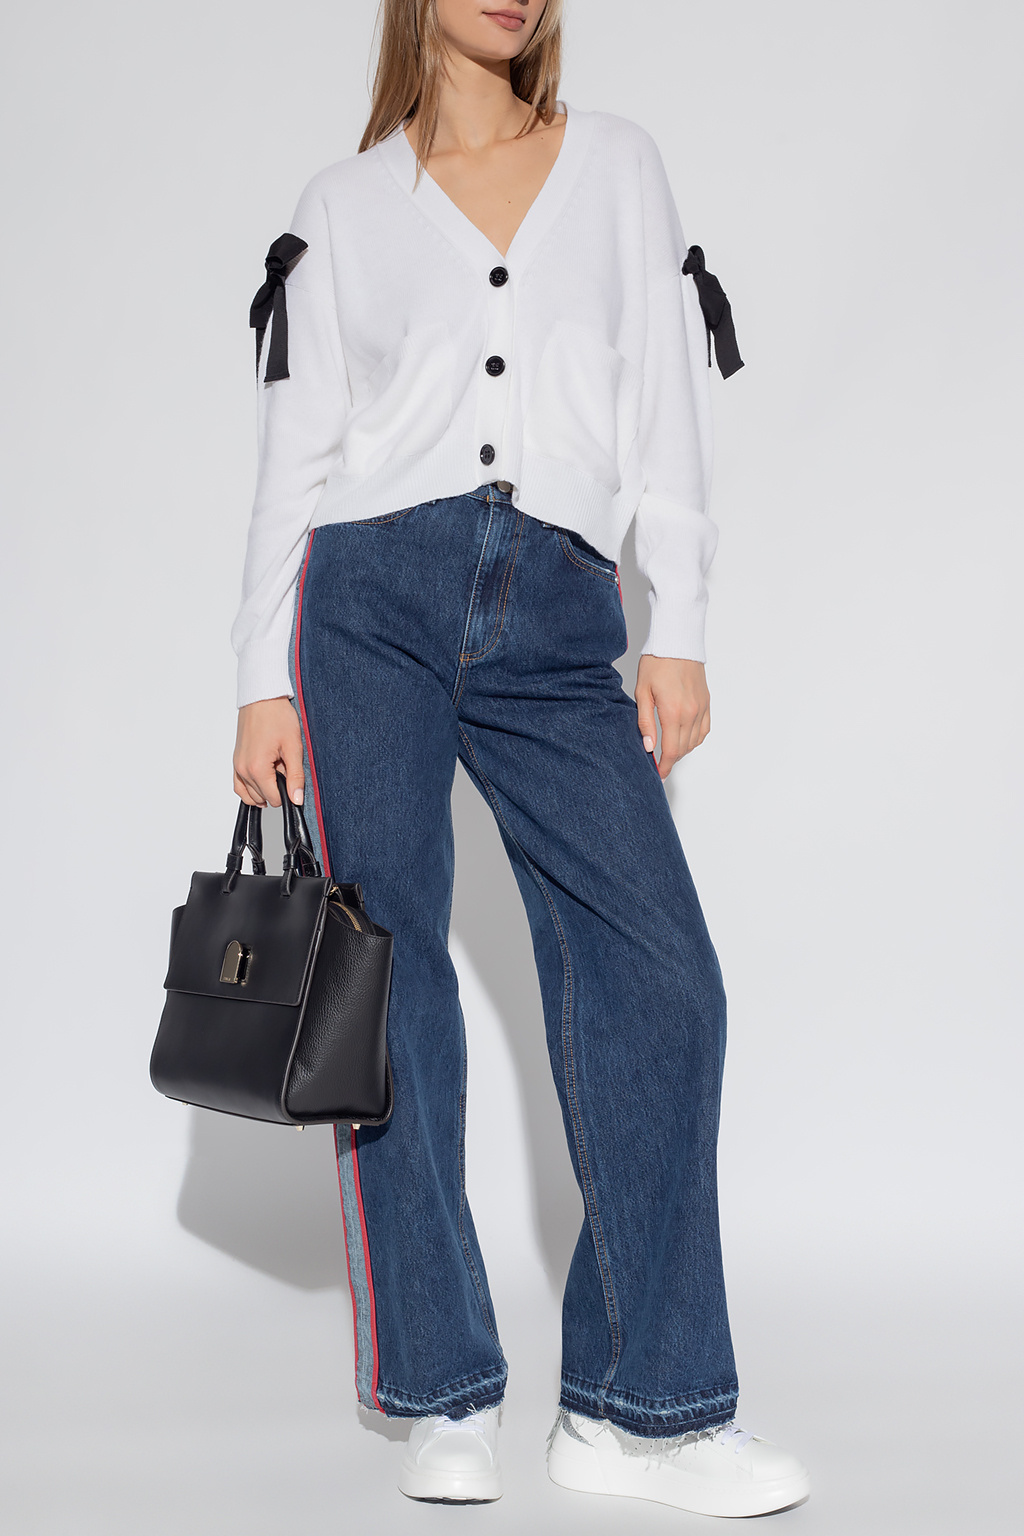 Red valentino ankle Side-stripe jeans